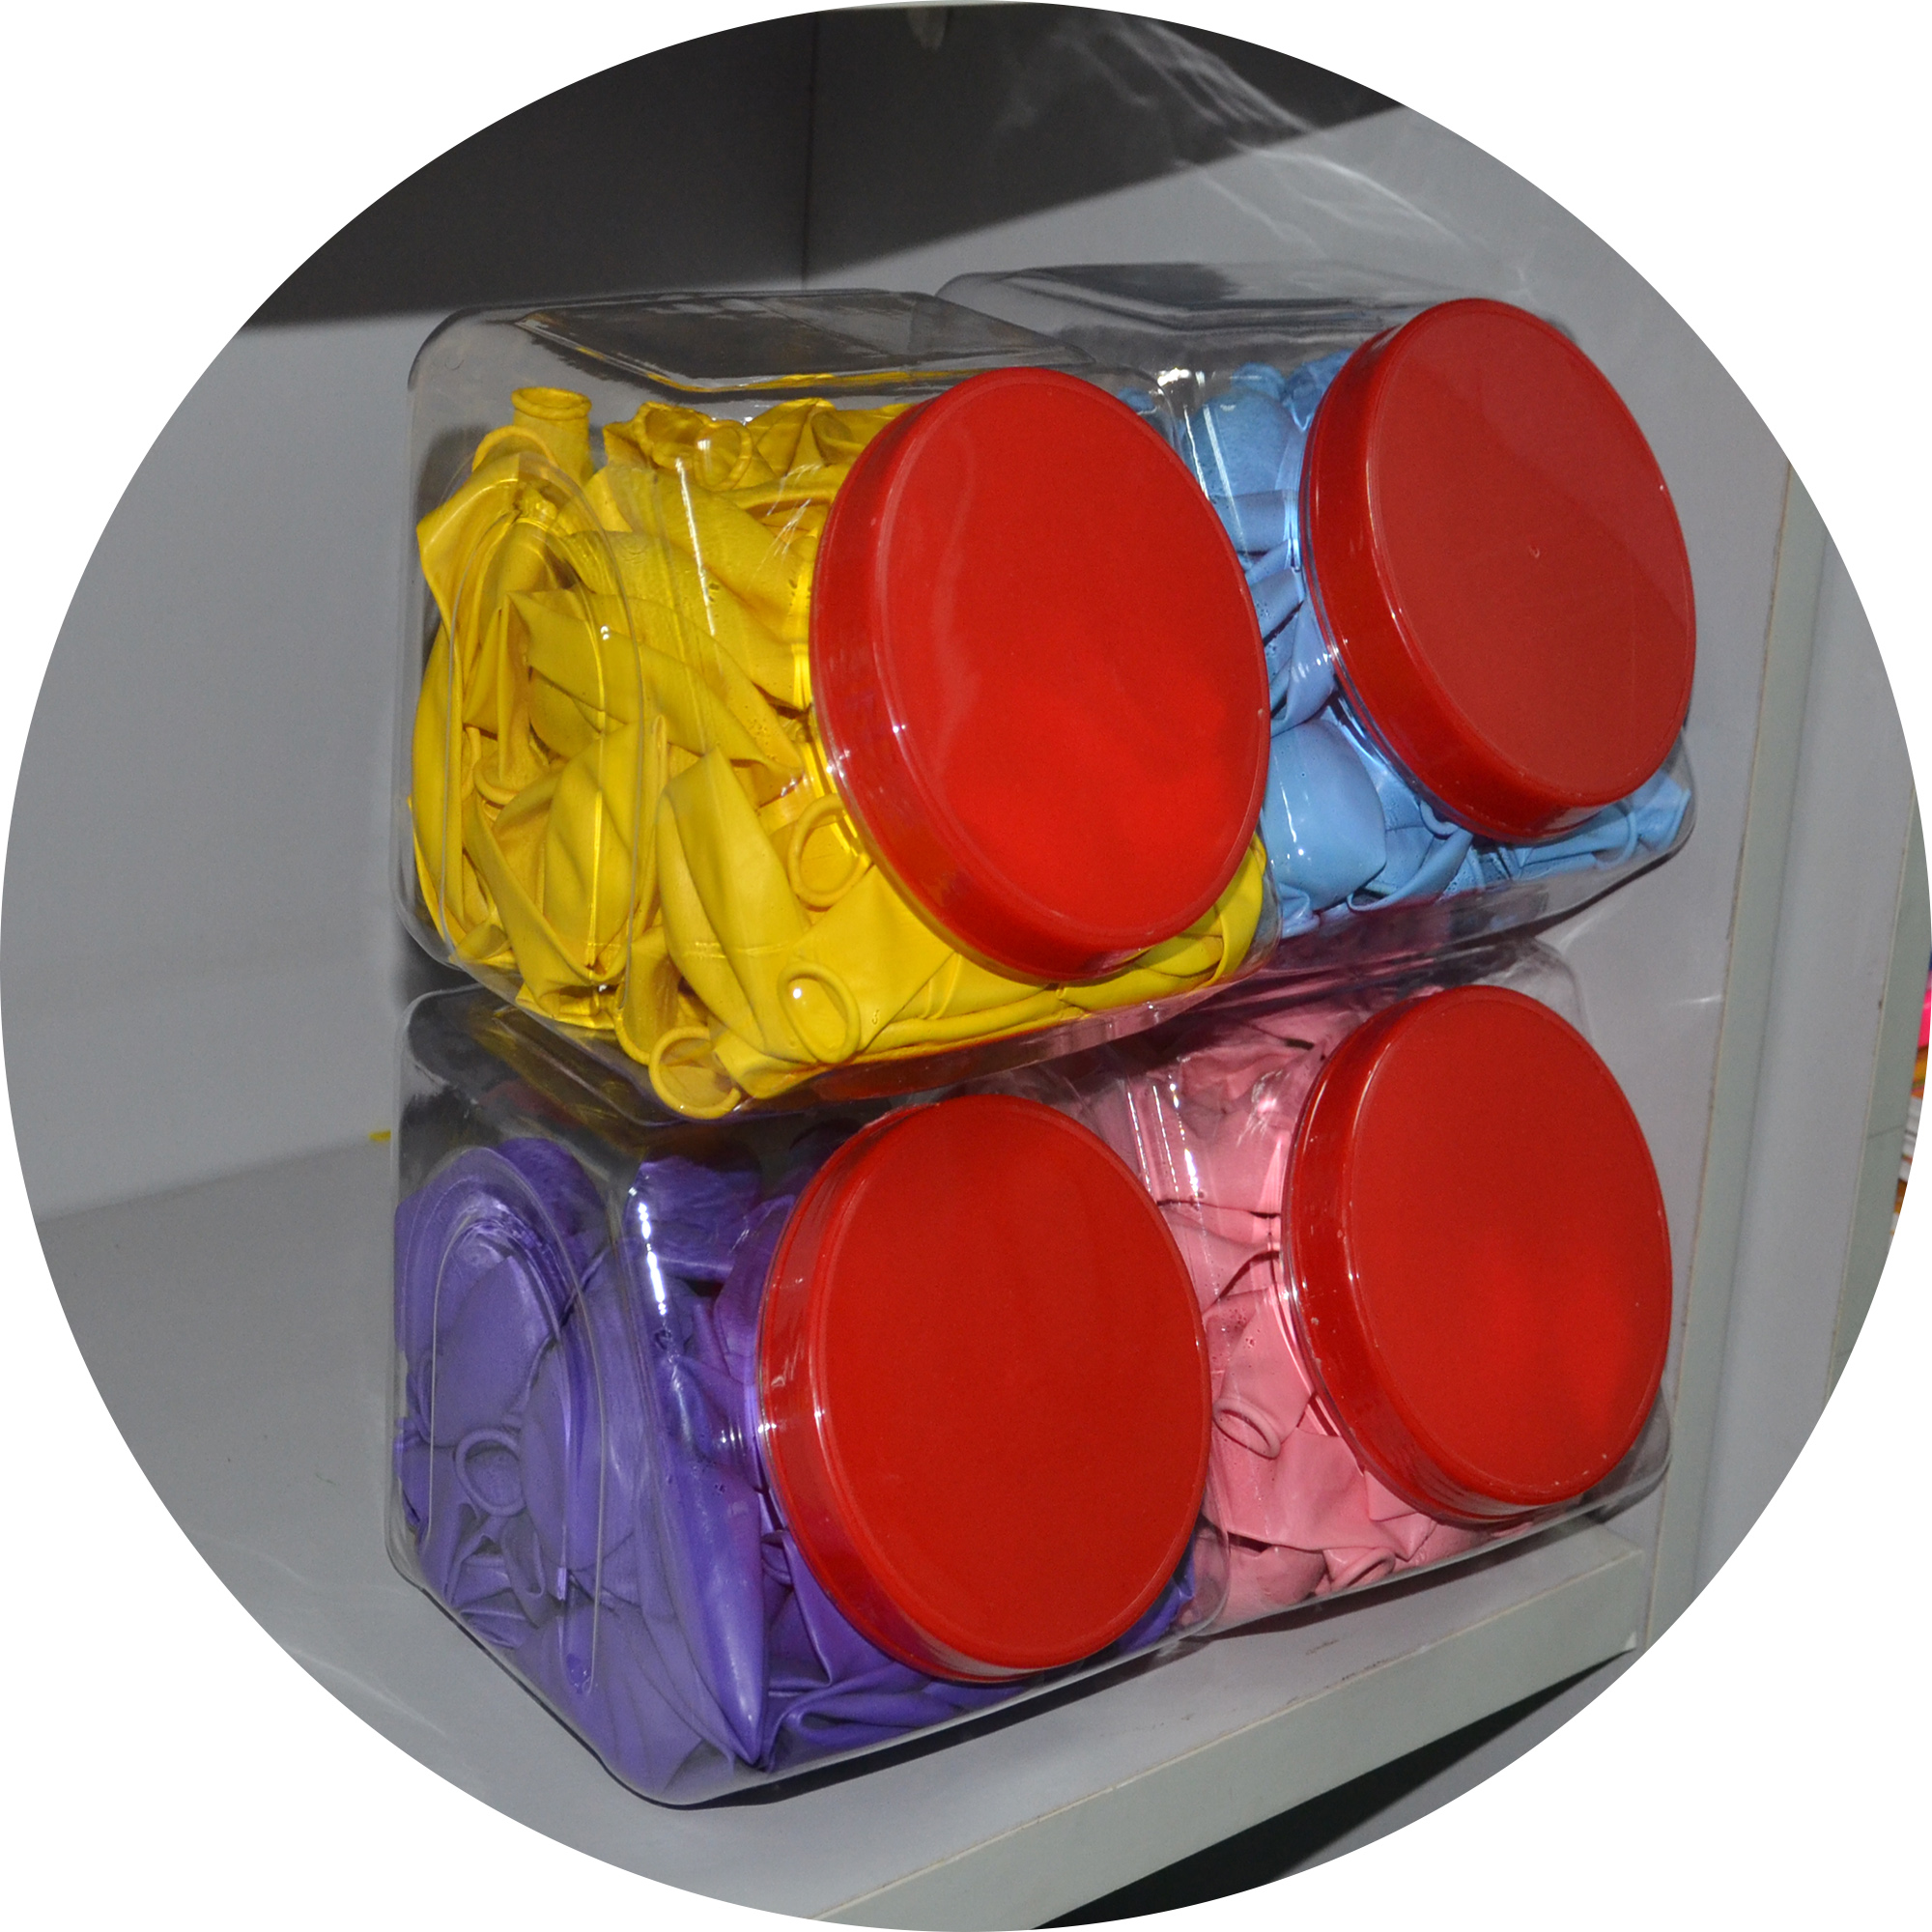 PKQWTM Colorful Party Balloon Dozens Of Balloons Storage Bag Clear Window  Storage Bins Boxes Large Capacity Foldable Stackable Organizer With Steel